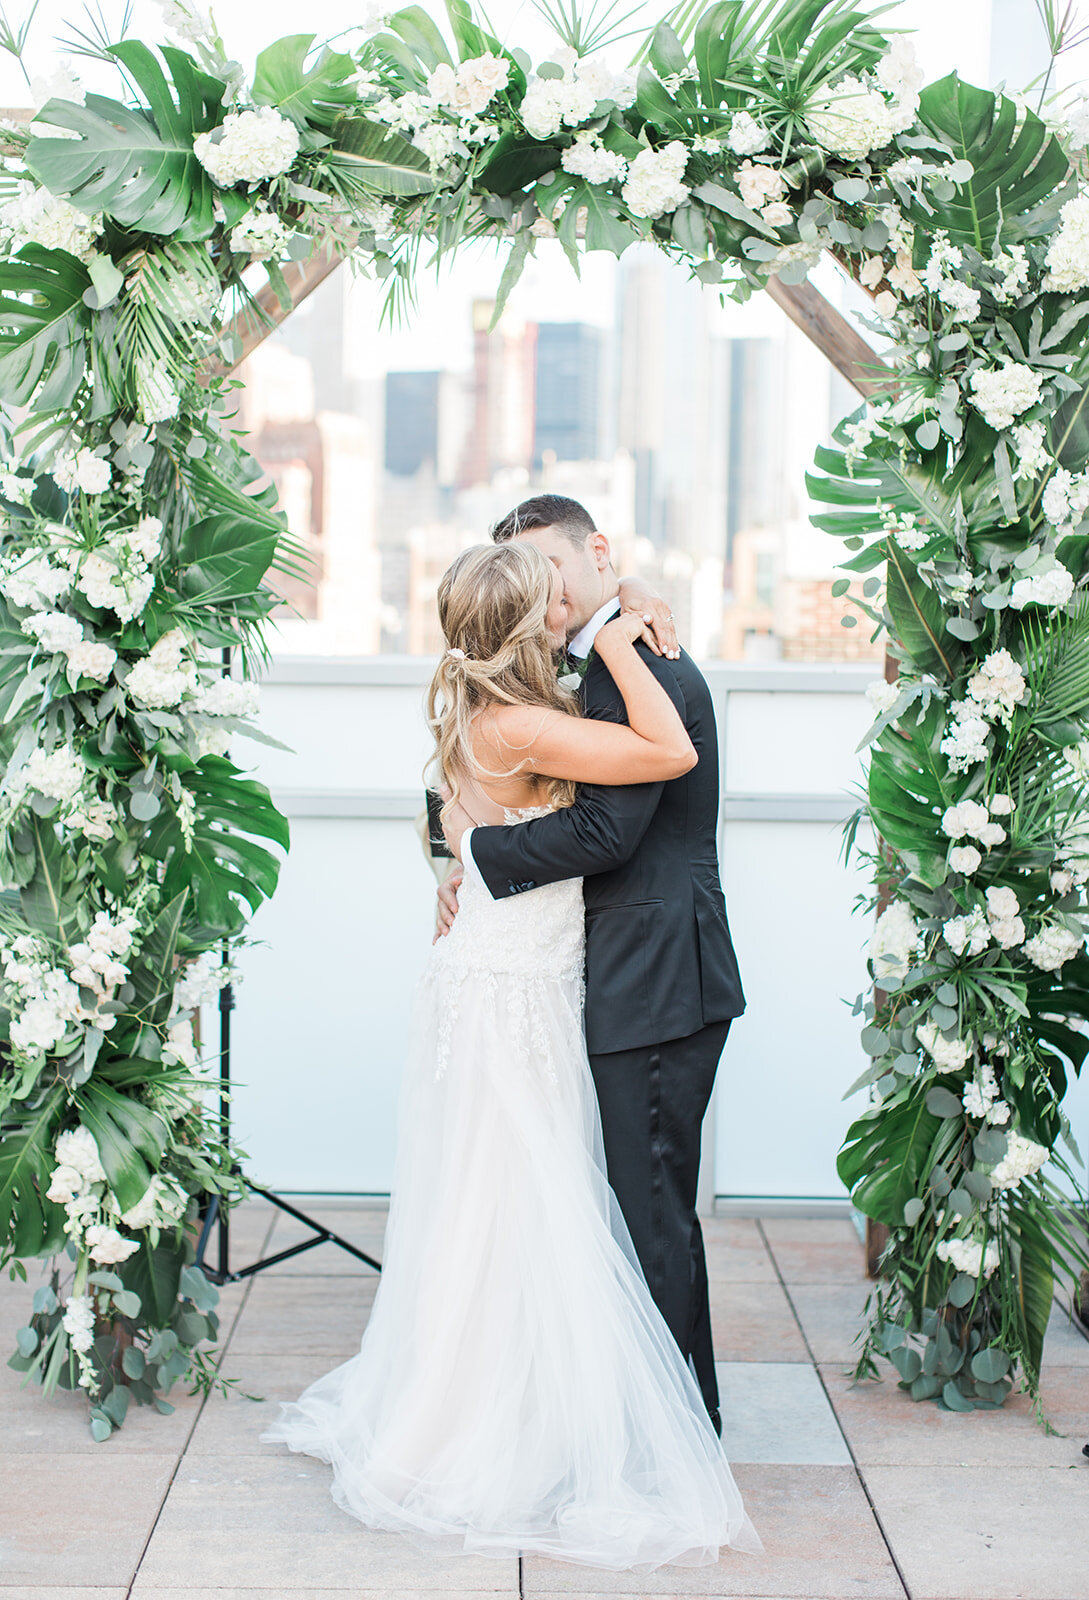 Kait and Joe — Floral Designs by Justine